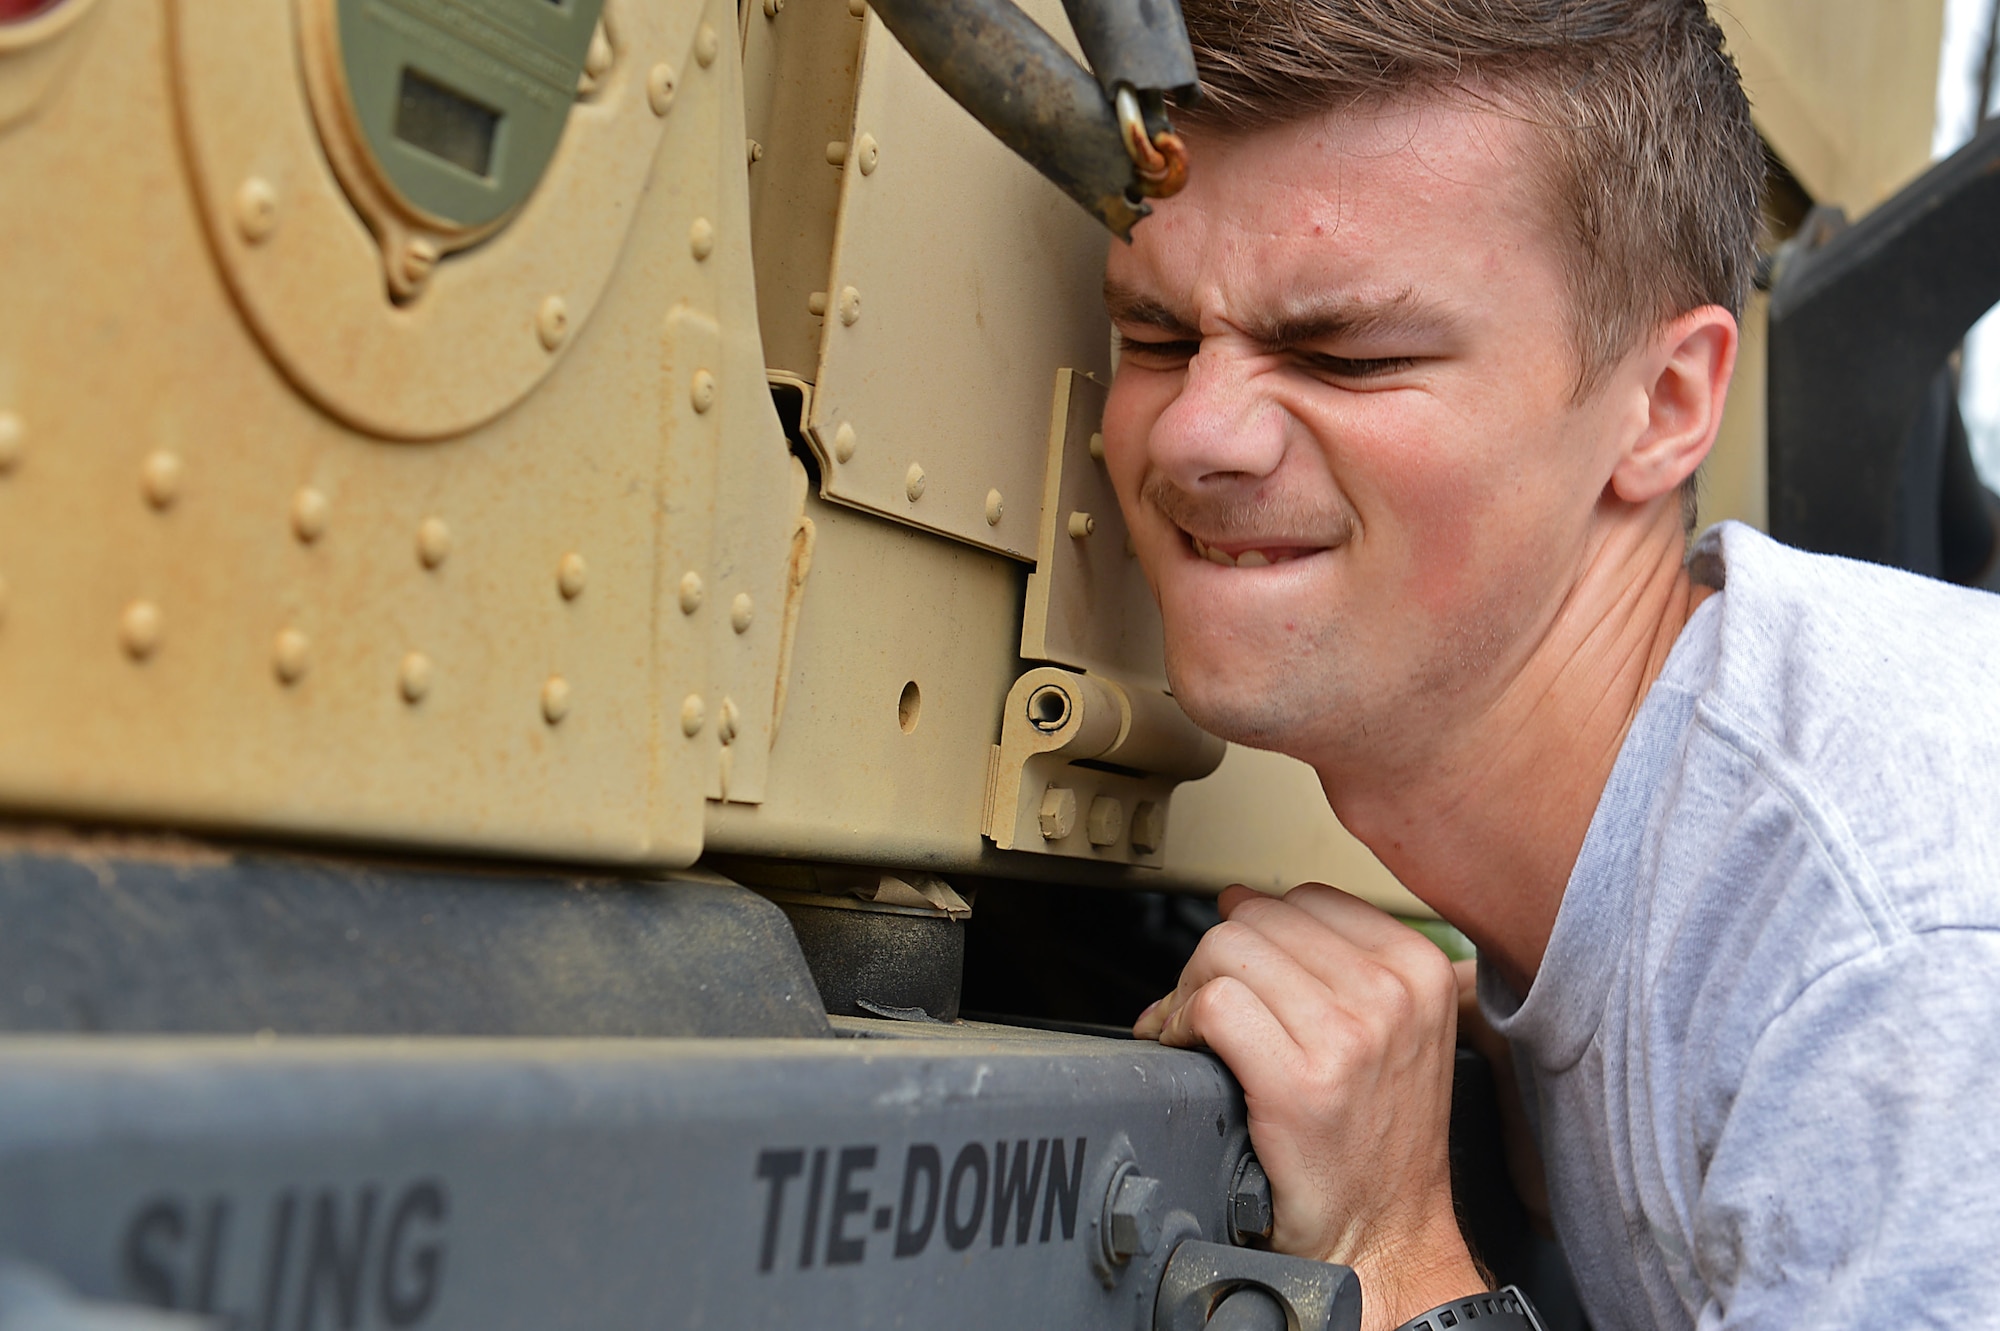 U.S. Air Force Airman 1st Class Dylen Sullivan, 20th Logistics Readiness Squadron vehicle maintenance apprentice, pushes a Humvee during a Comprehensive Airman Fitness sports day at Shaw Air Force Base, S.C., Aug. 10, 2016. Sullivan along with other Airmen, competed in a course that tested runners’ physical resiliency as well as their knowledge of the Air Force. (U.S. Air Force photo by Airman 1st Class Christopher Maldonado)